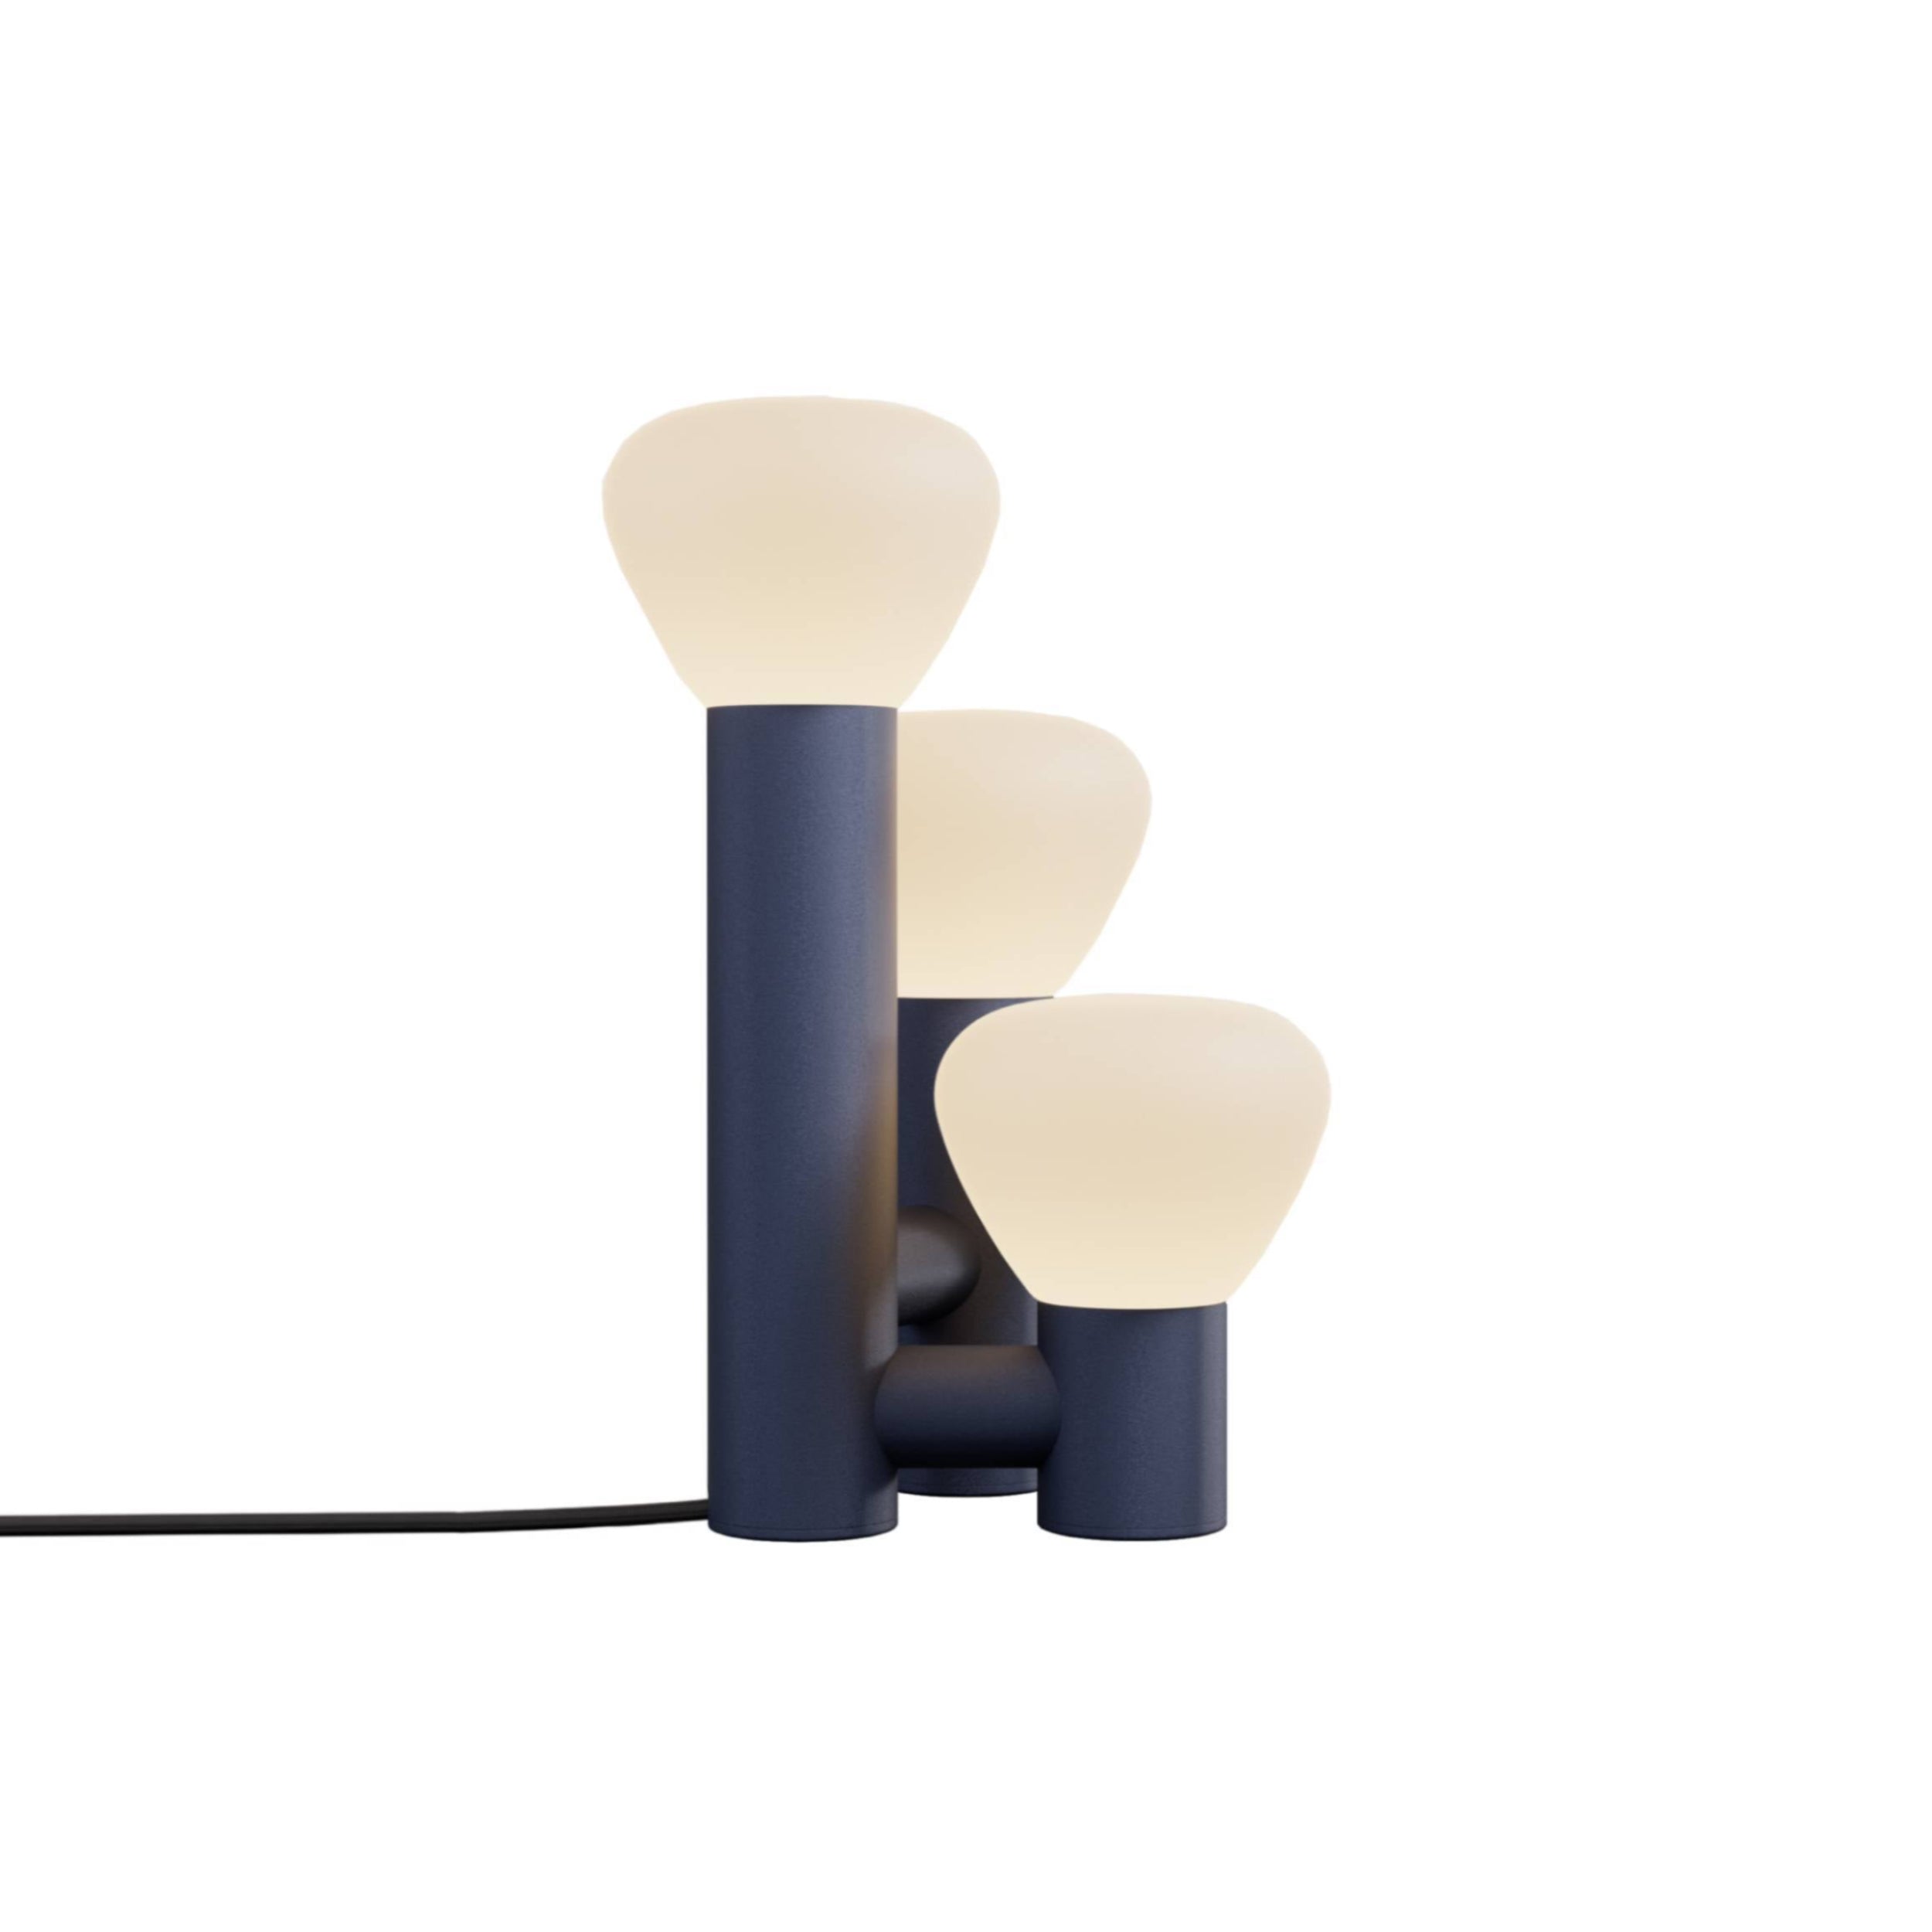 Parc 06 Table Lamp: Footswitch +  Midnight Blue + Black